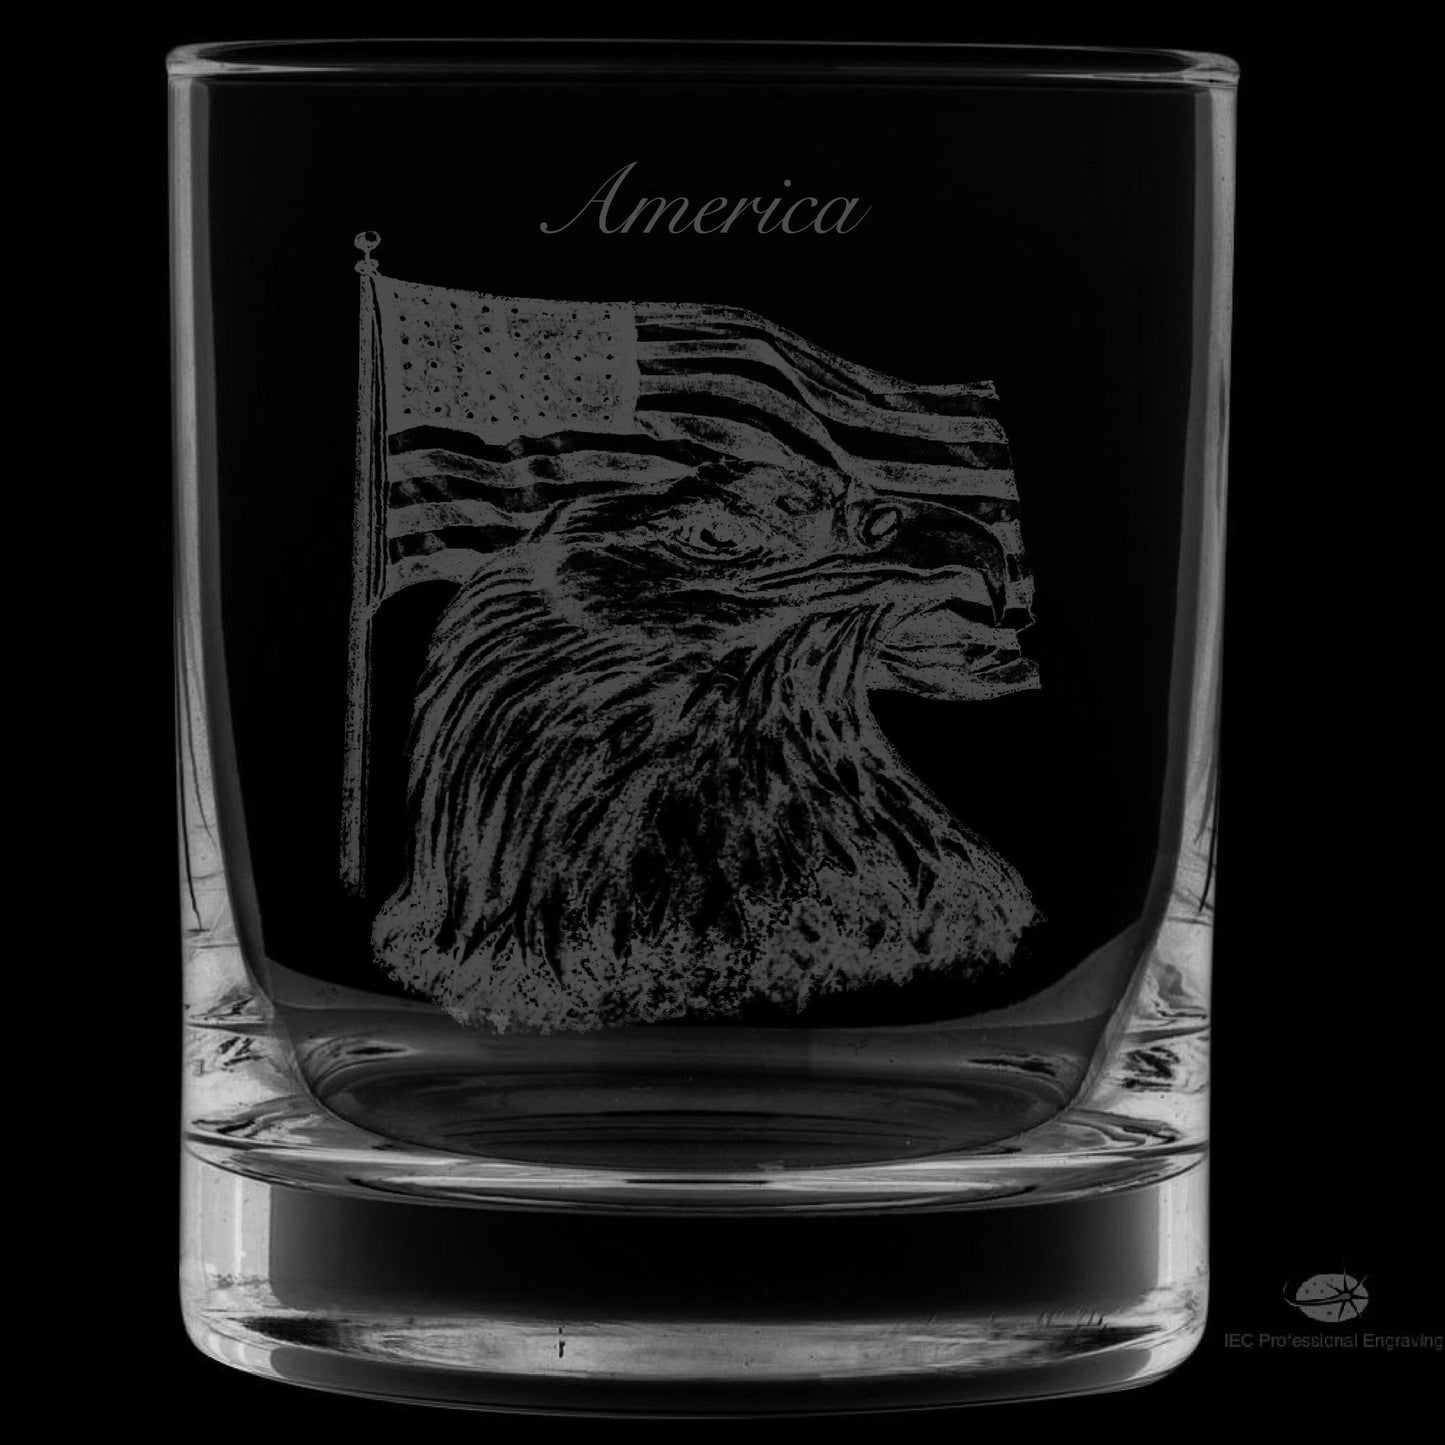 America 12 Ounce Rocks Glass-Image Drawn by Local Artist KW